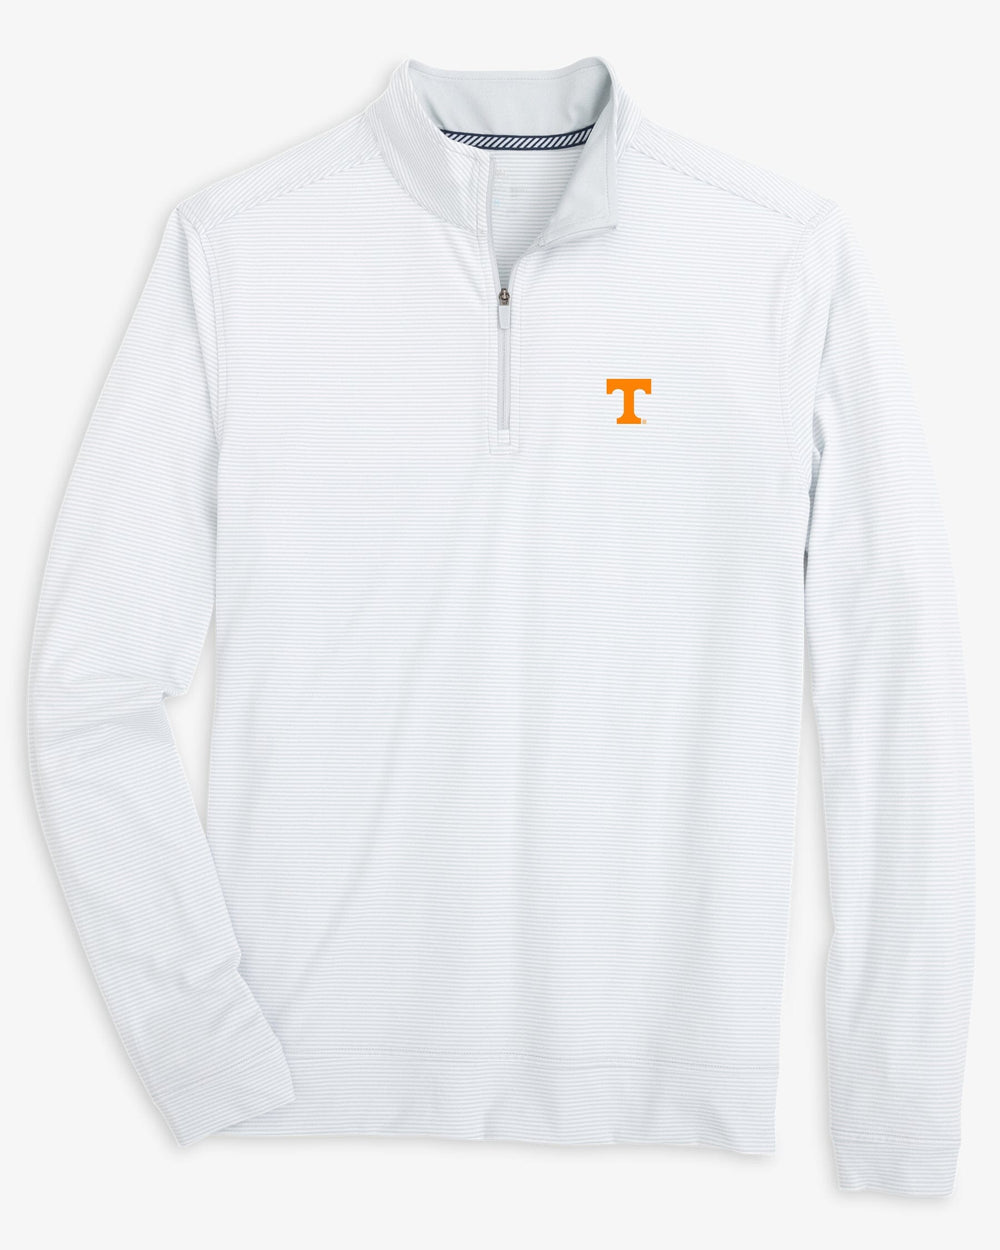 The front view of the Tennessee Vols Cruiser Micro-Stripe Heather Quarter Zip by Southern Tide - Heather Slate Grey